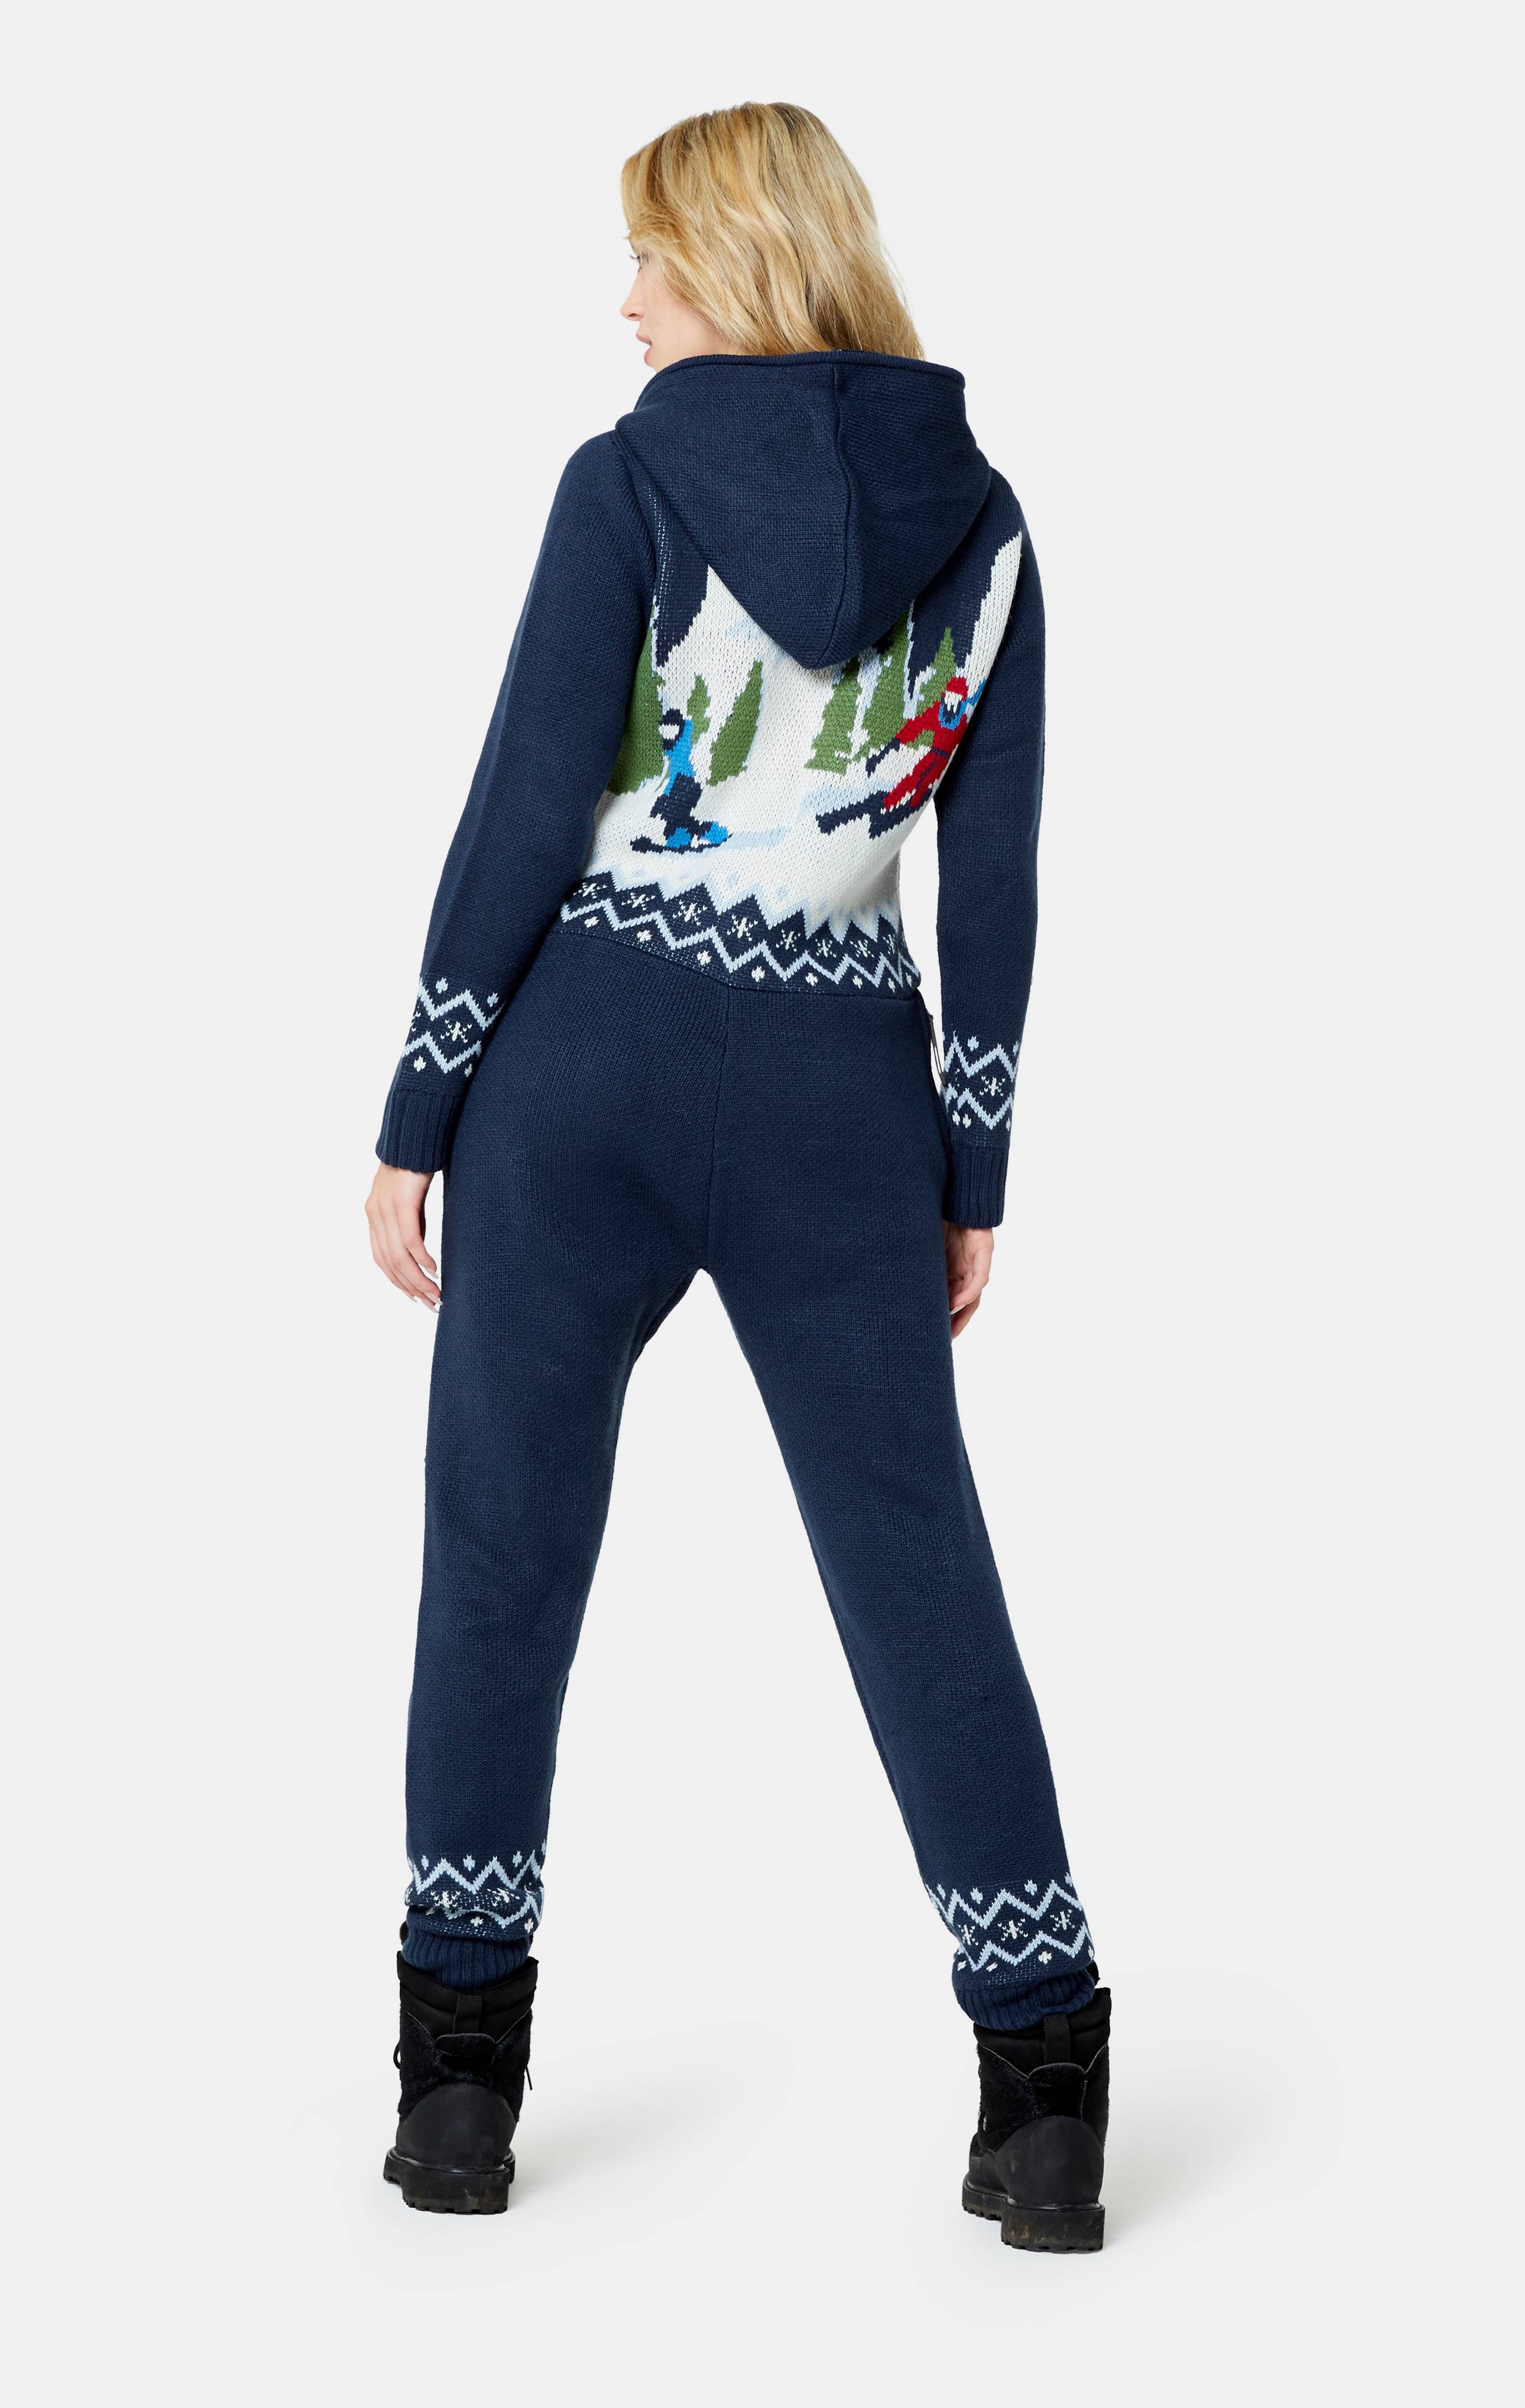 Onepiece Slopestyle Jumpsuit Navy - 8